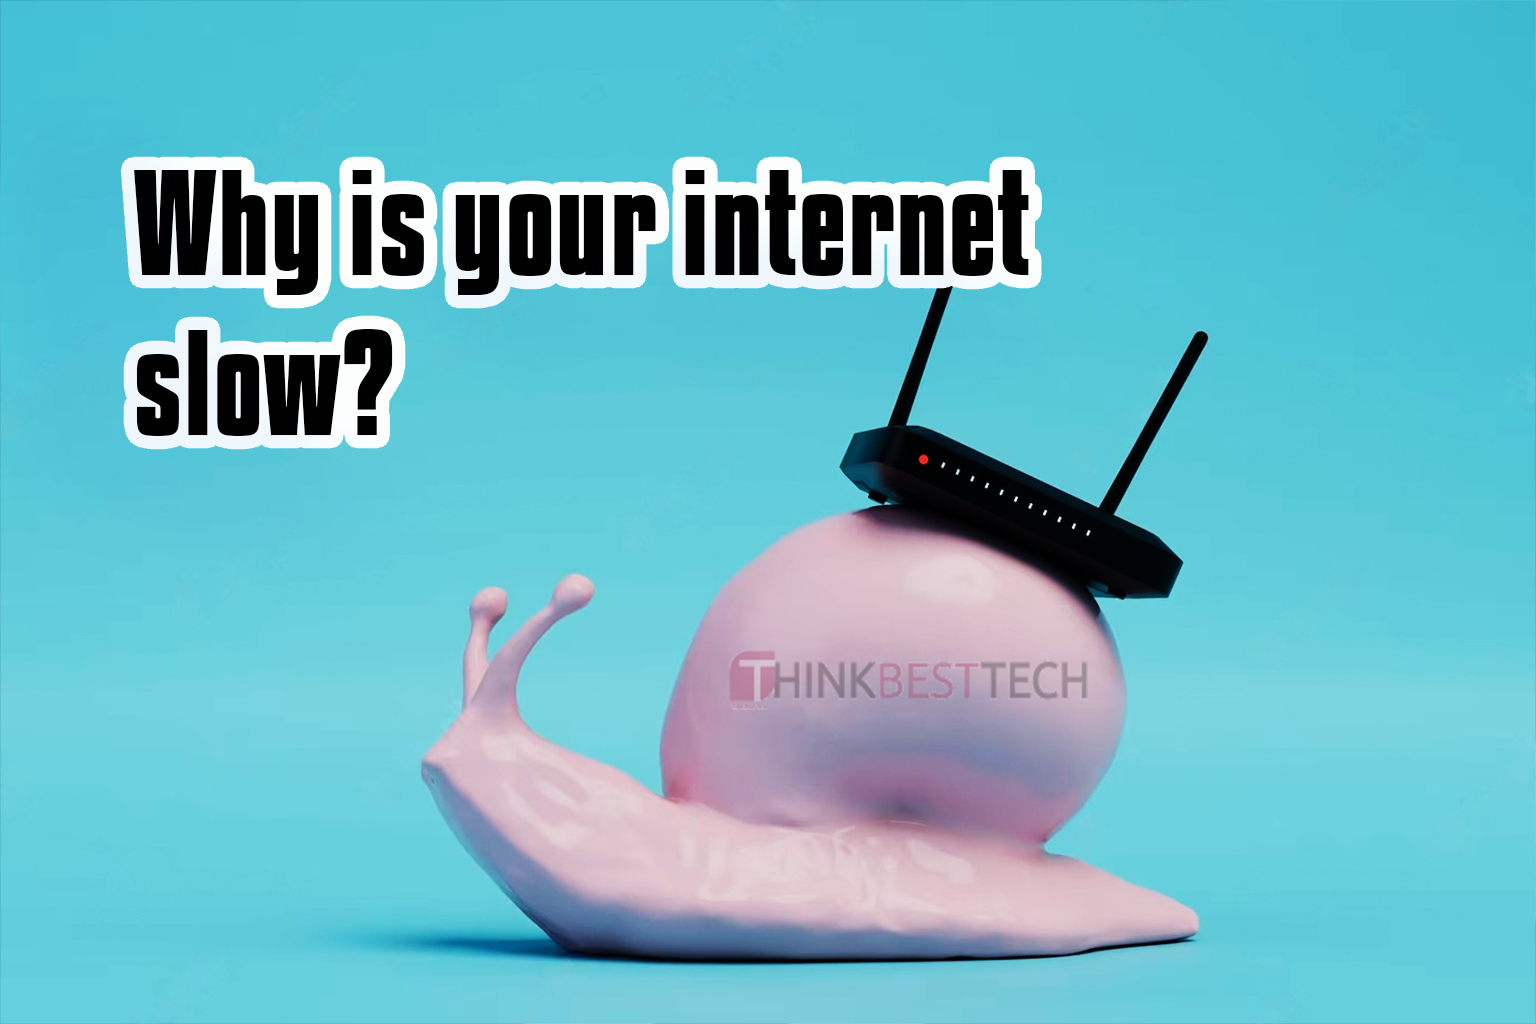 Why is your internet slow?